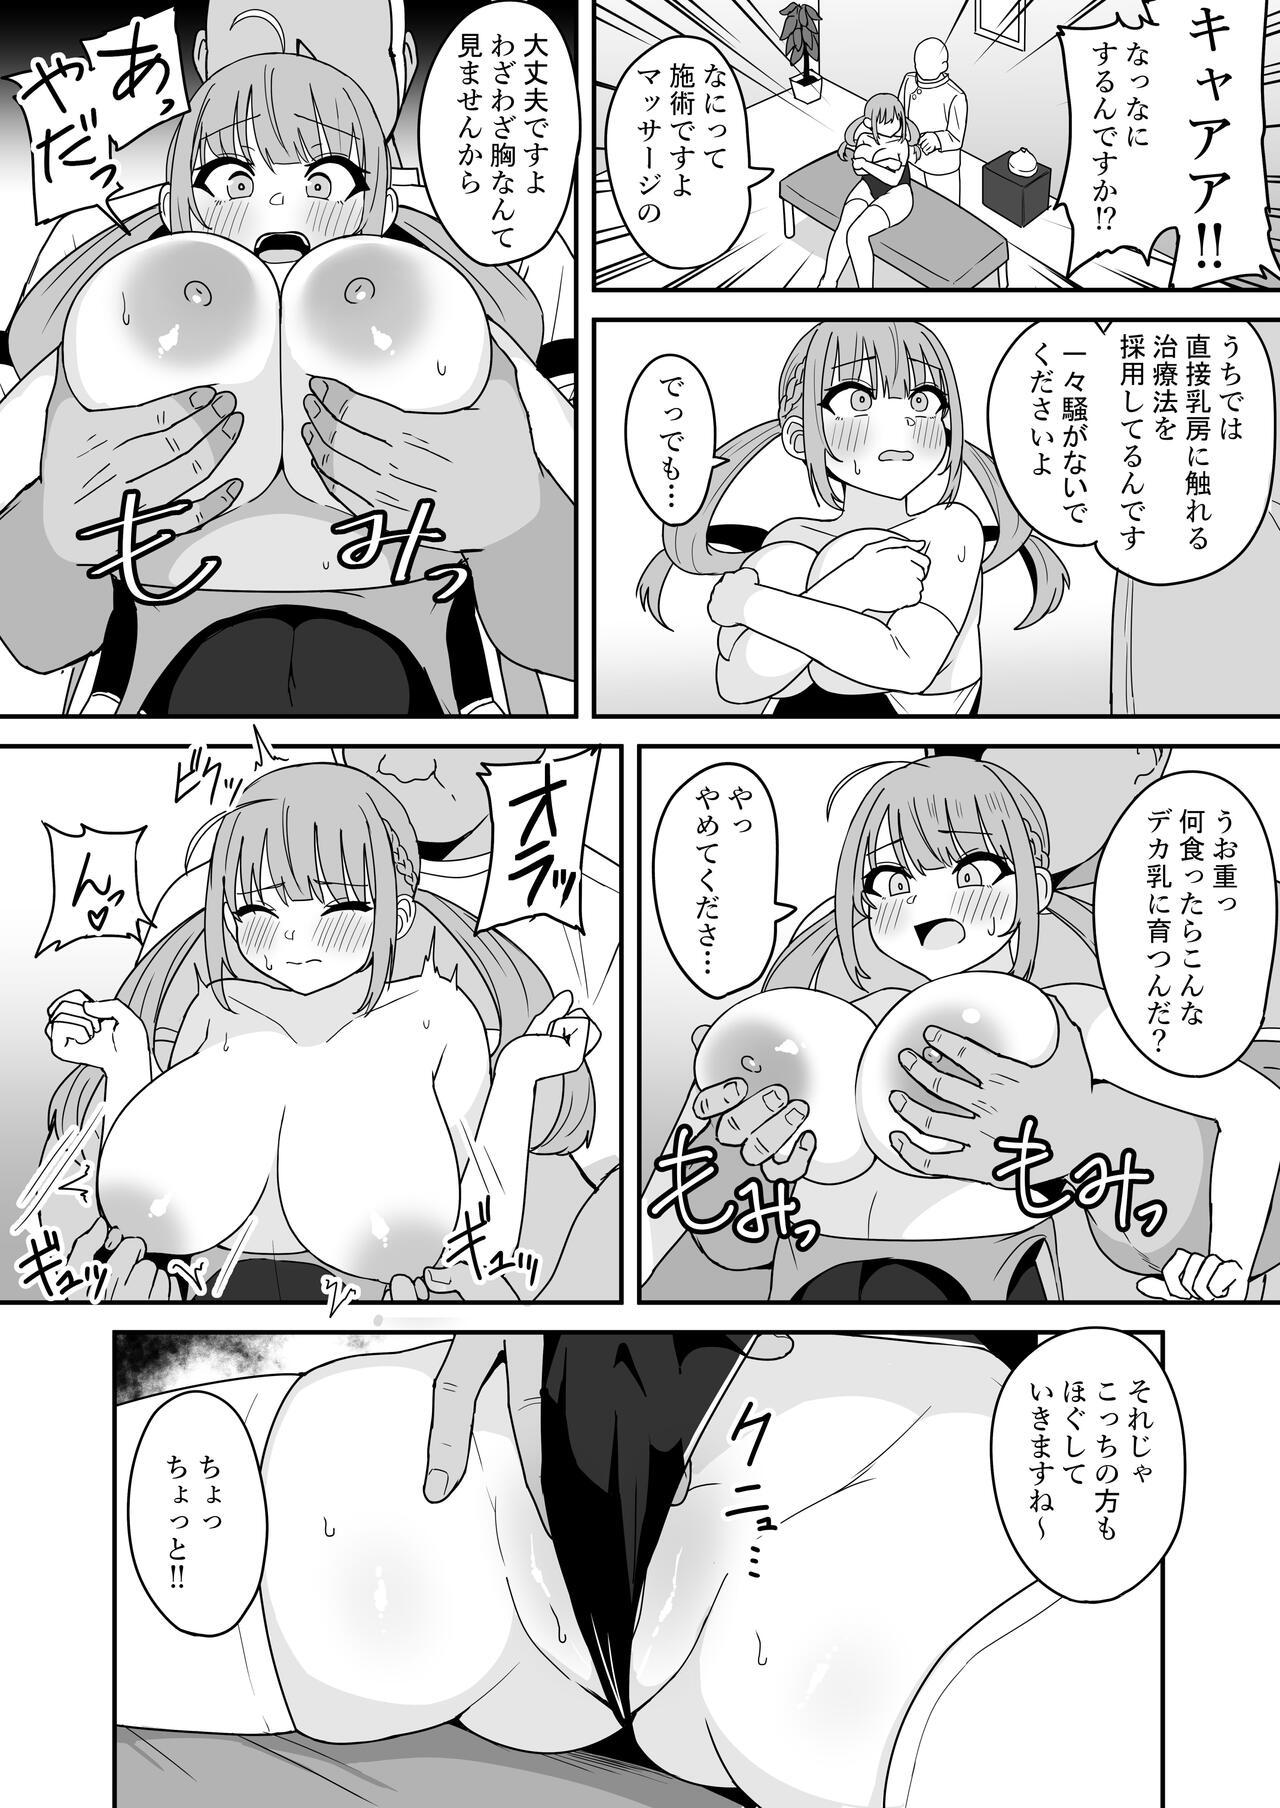 Milfs Aqua Gets Sexually Harassed at a Massage Parlor - Hololive Camwhore - Page 4